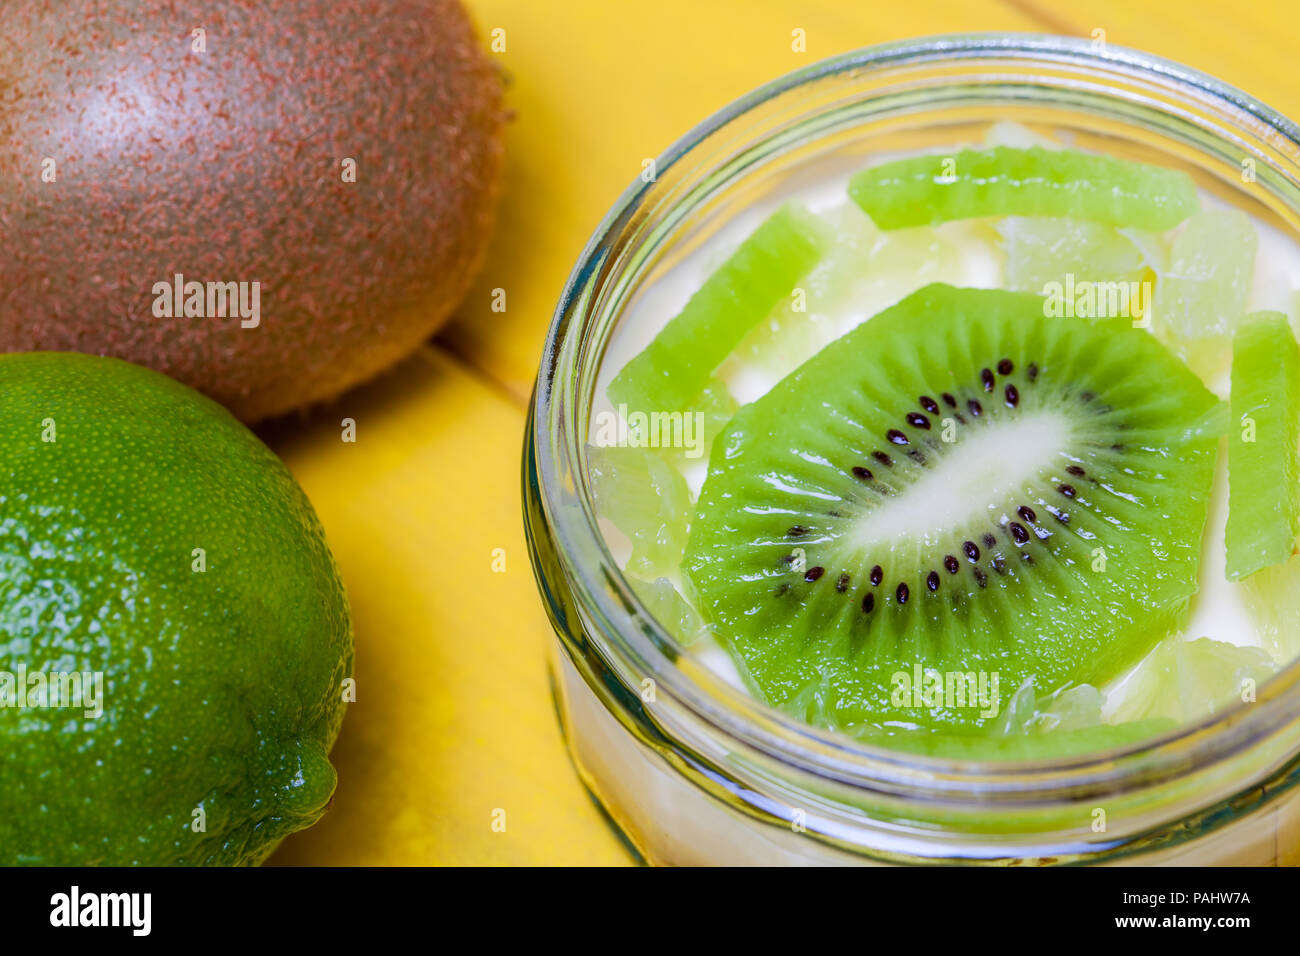 Lime and Kiwi fruit sweet dessert. High vitamin C tasty health food. Bright vivid and colorful green and yellow image in close up. Healthy eating. Stock Photo